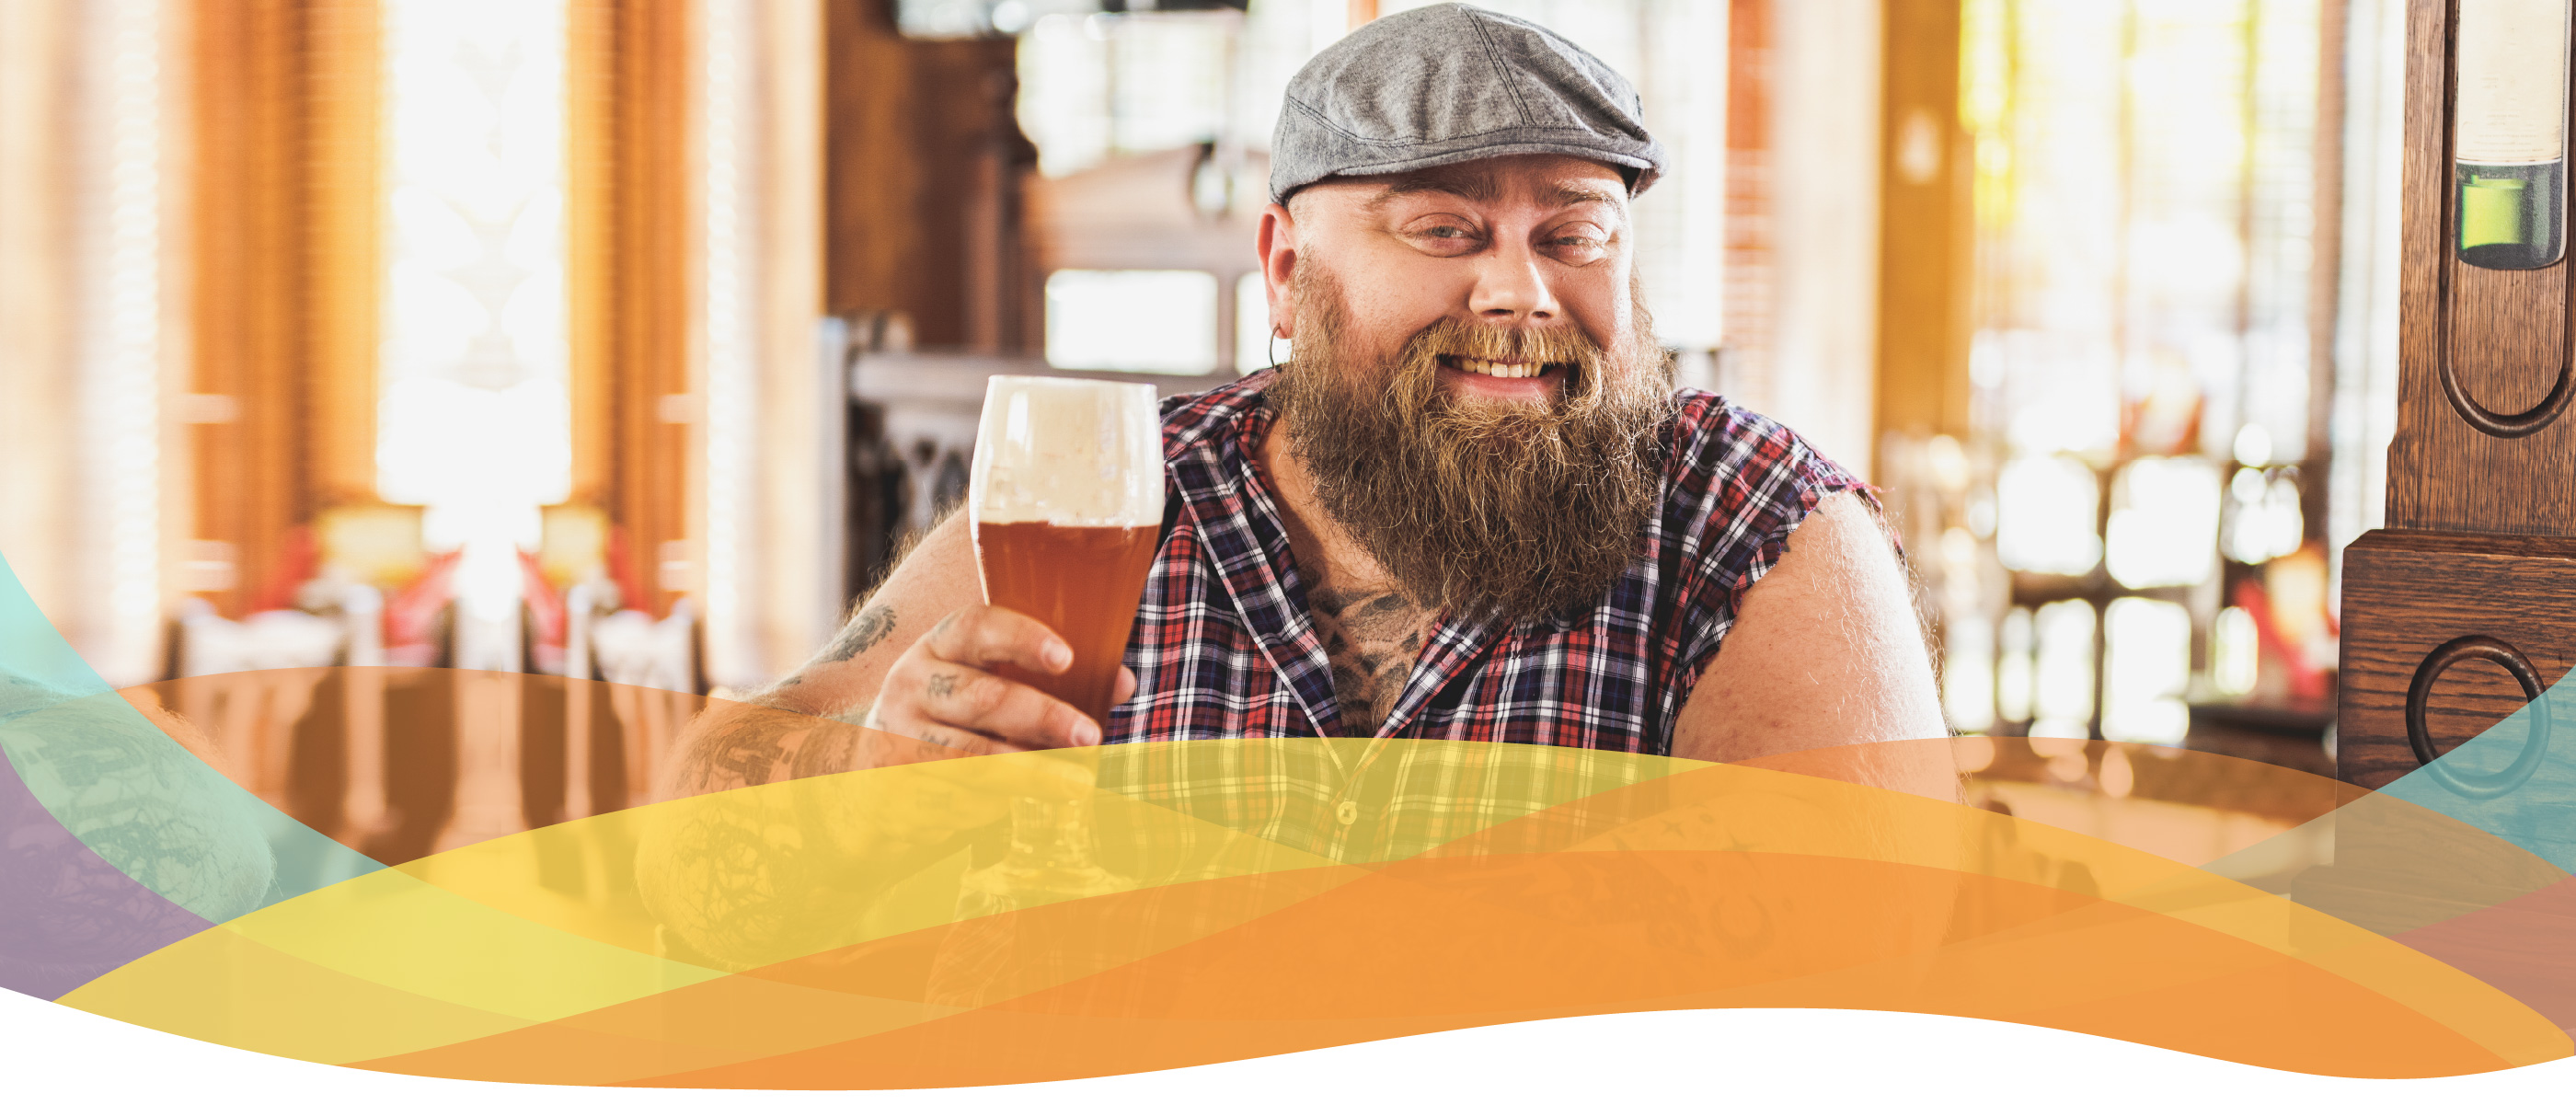 Plus-sized man with a long beard sits in a bar, raising his glass in 